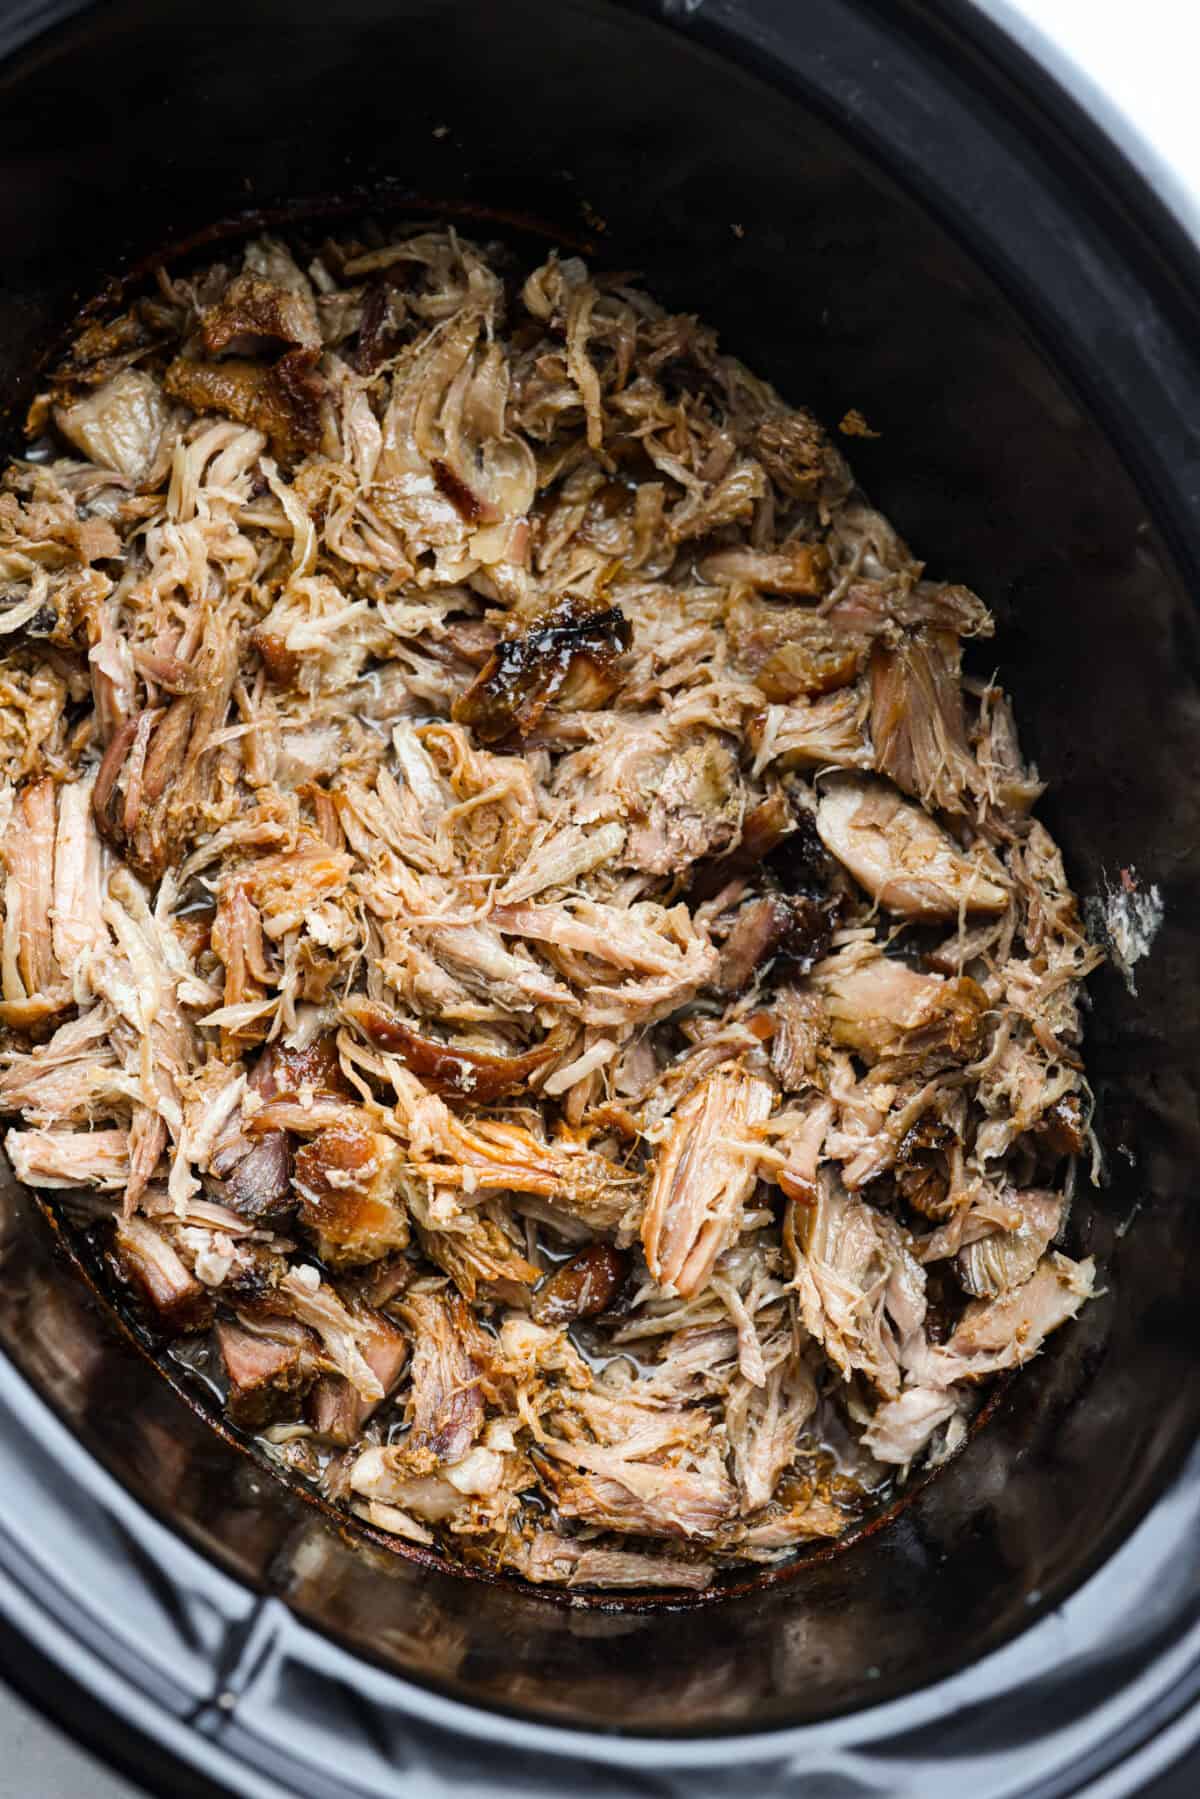 Top view of shredded pork cooked in the crockpot.